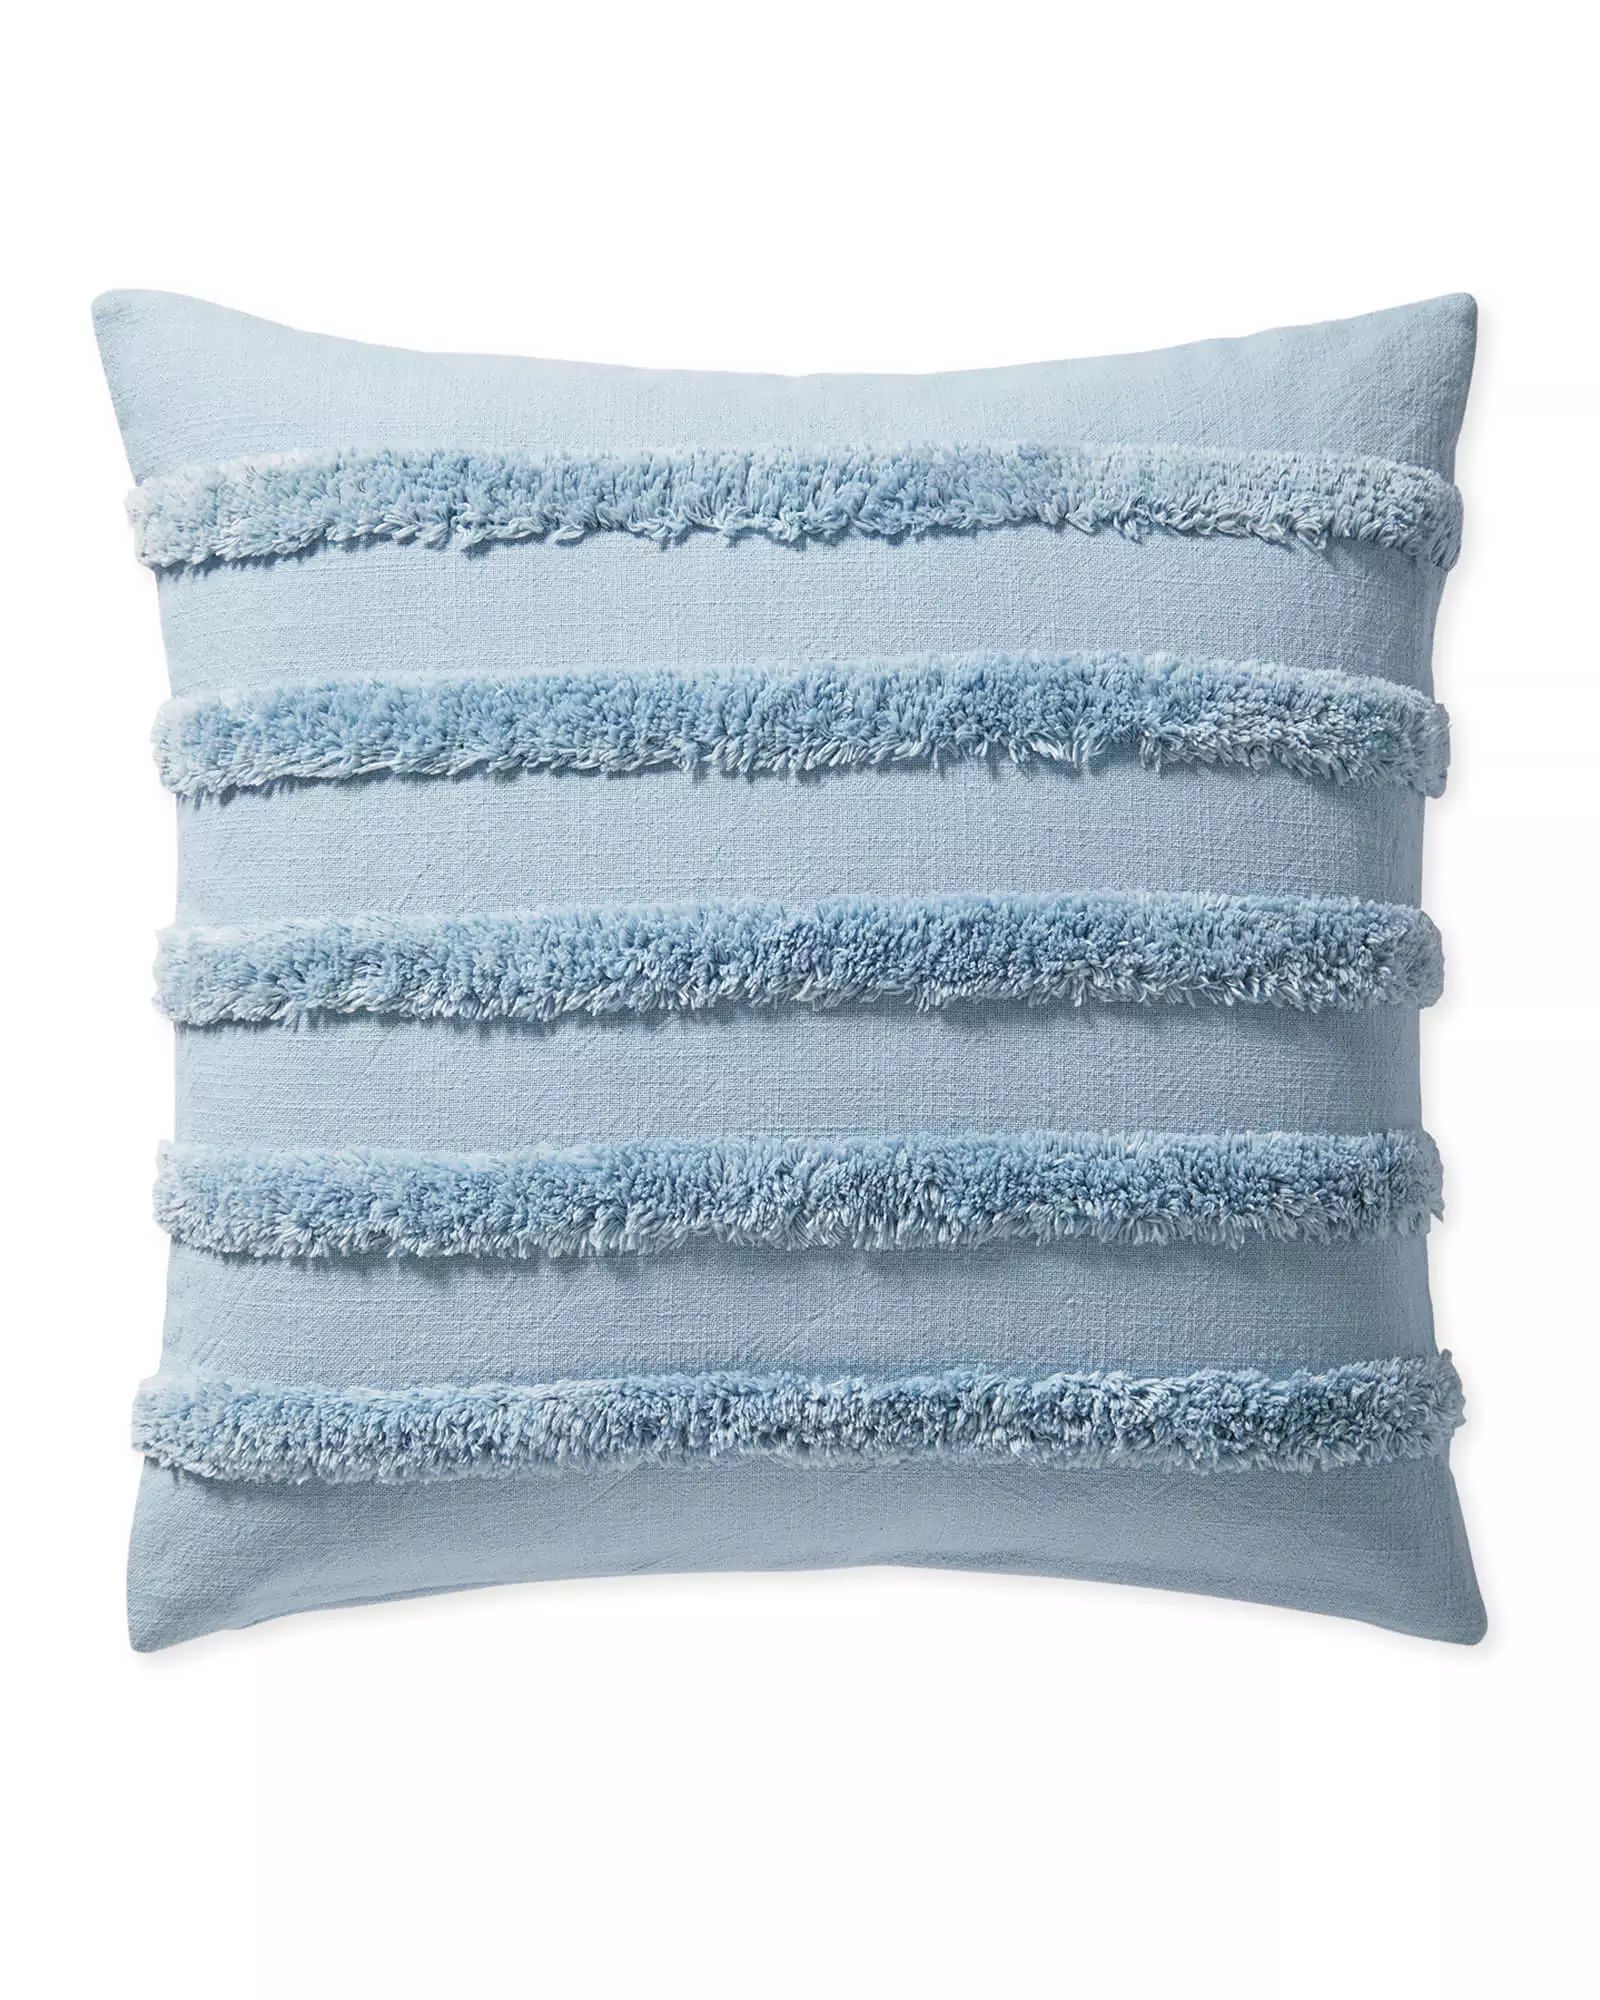 Cuesta Pillow Cover | Serena and Lily